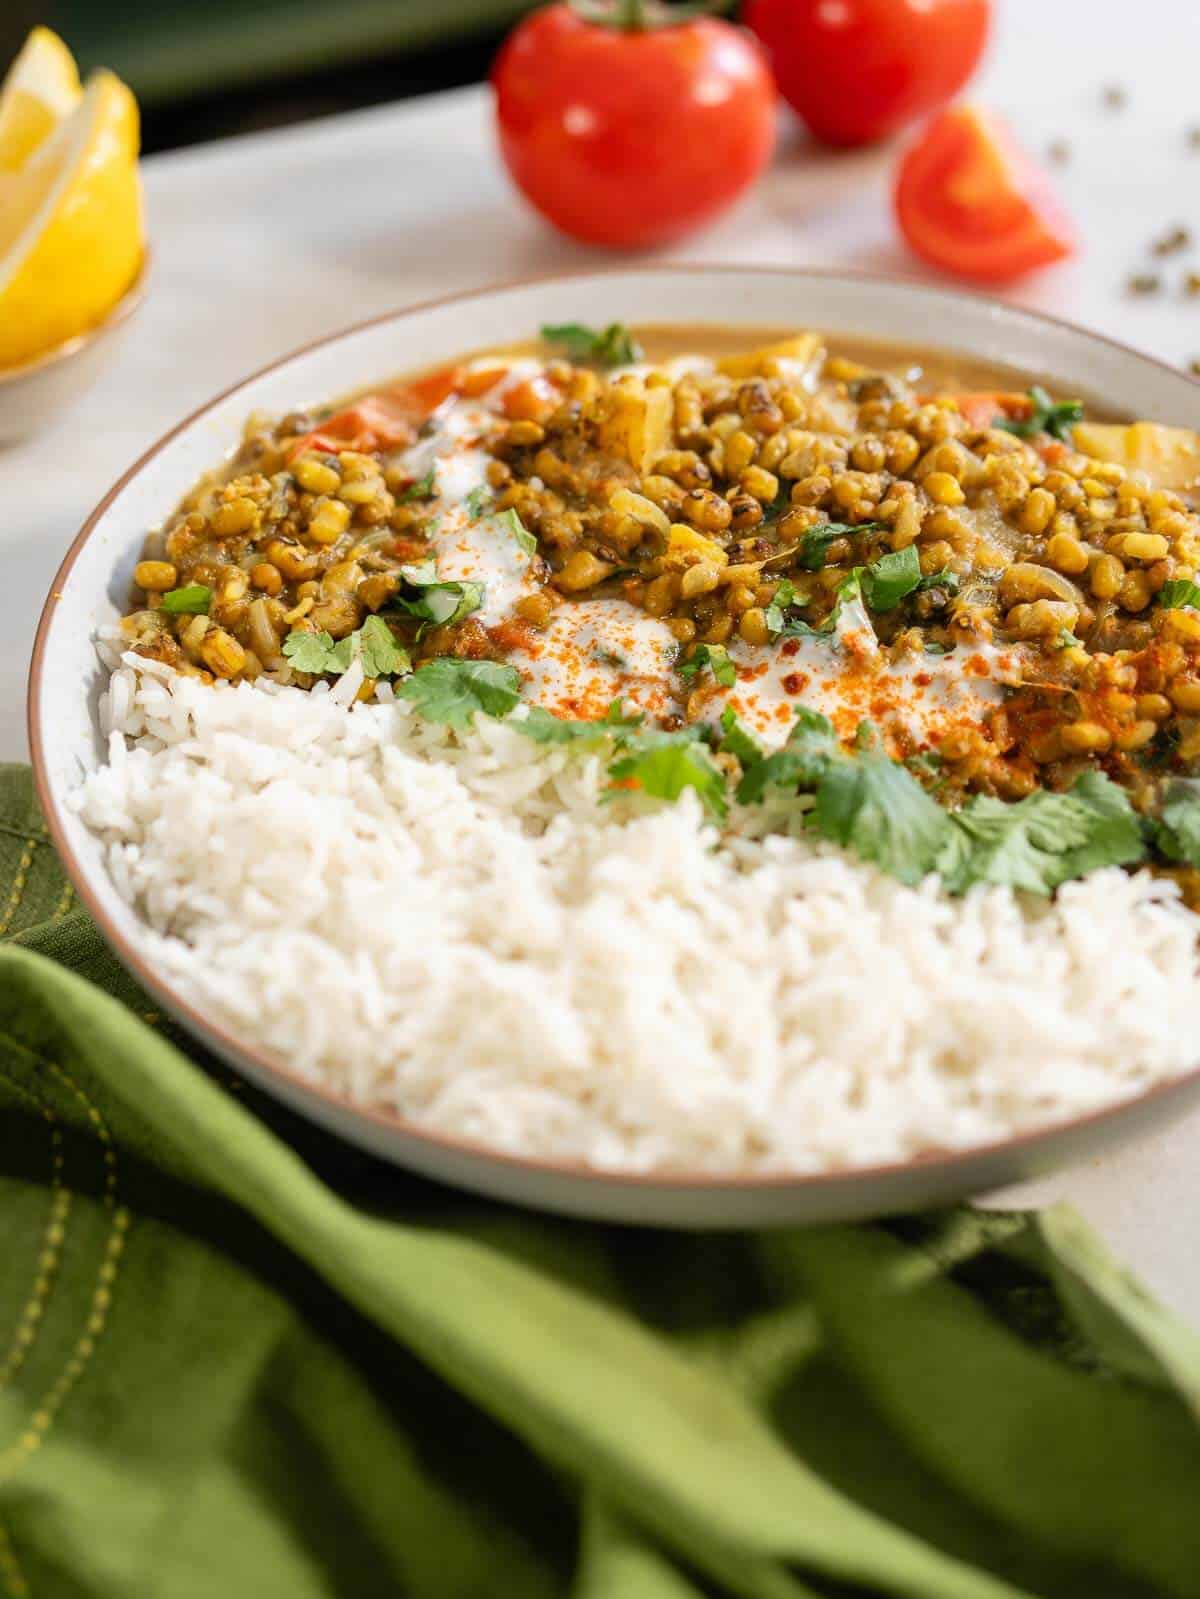 serving with chopped coriander, a swirl of coconut milk and cooked basmati rice.